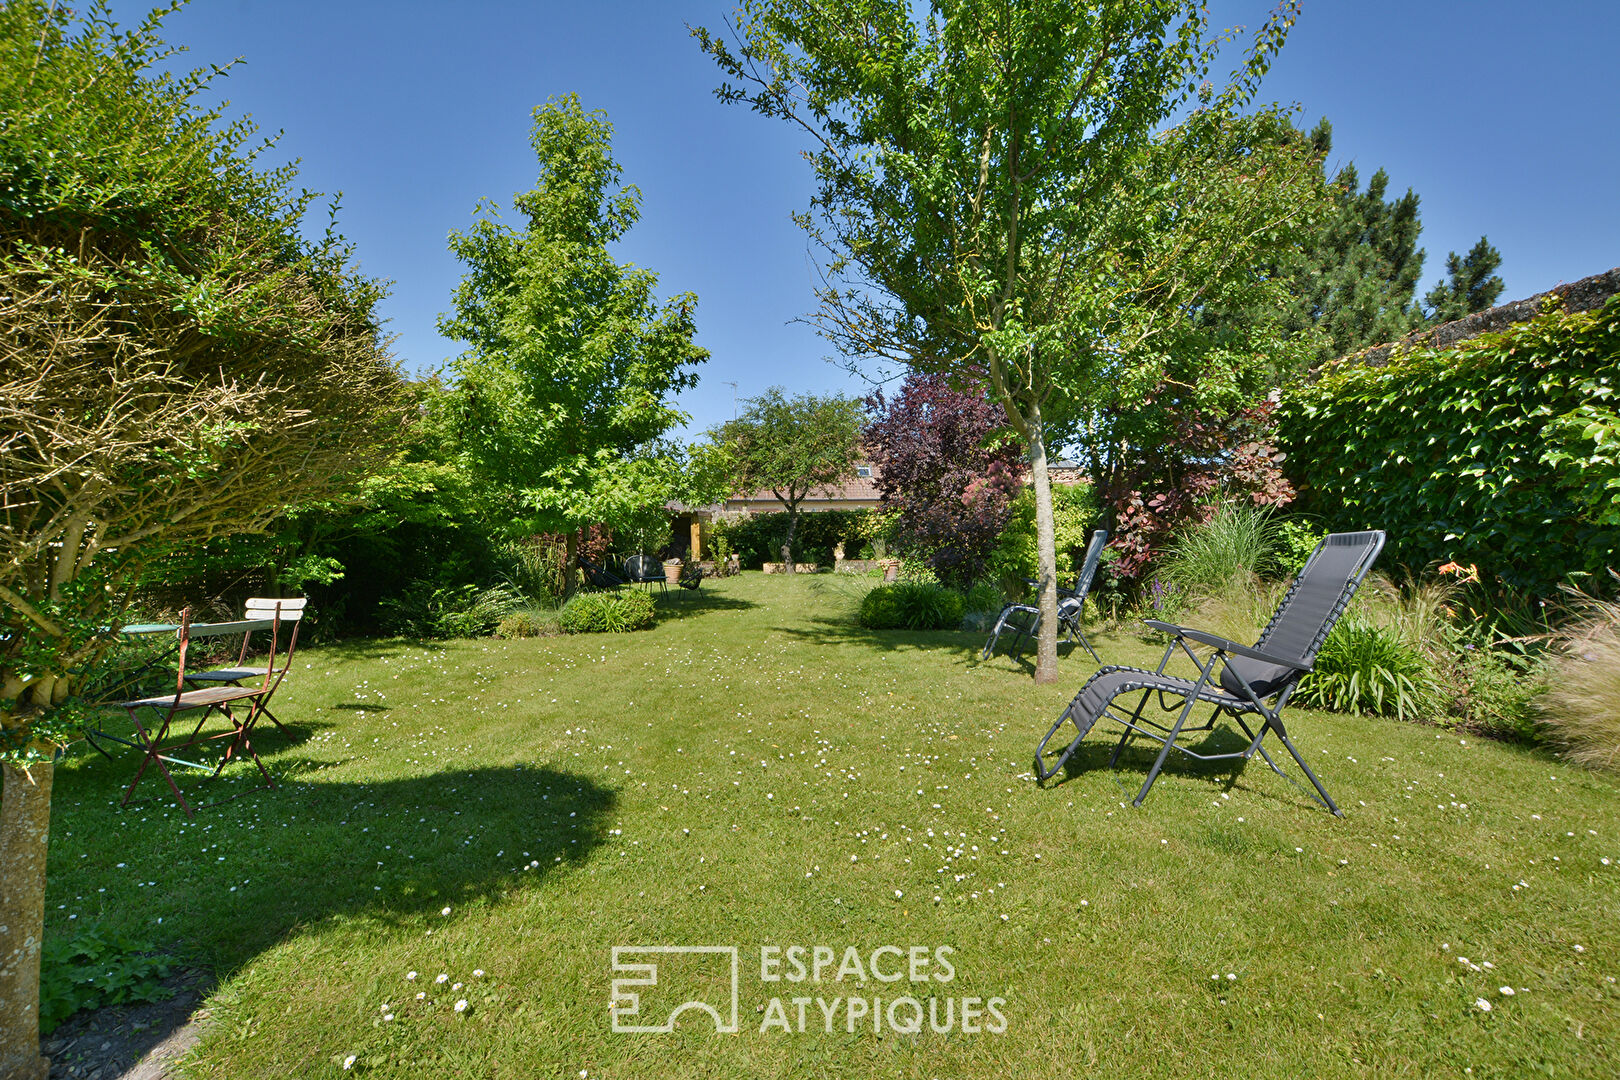 Elegant family villa in Le Crotoy in the heart of the Bay of Somme